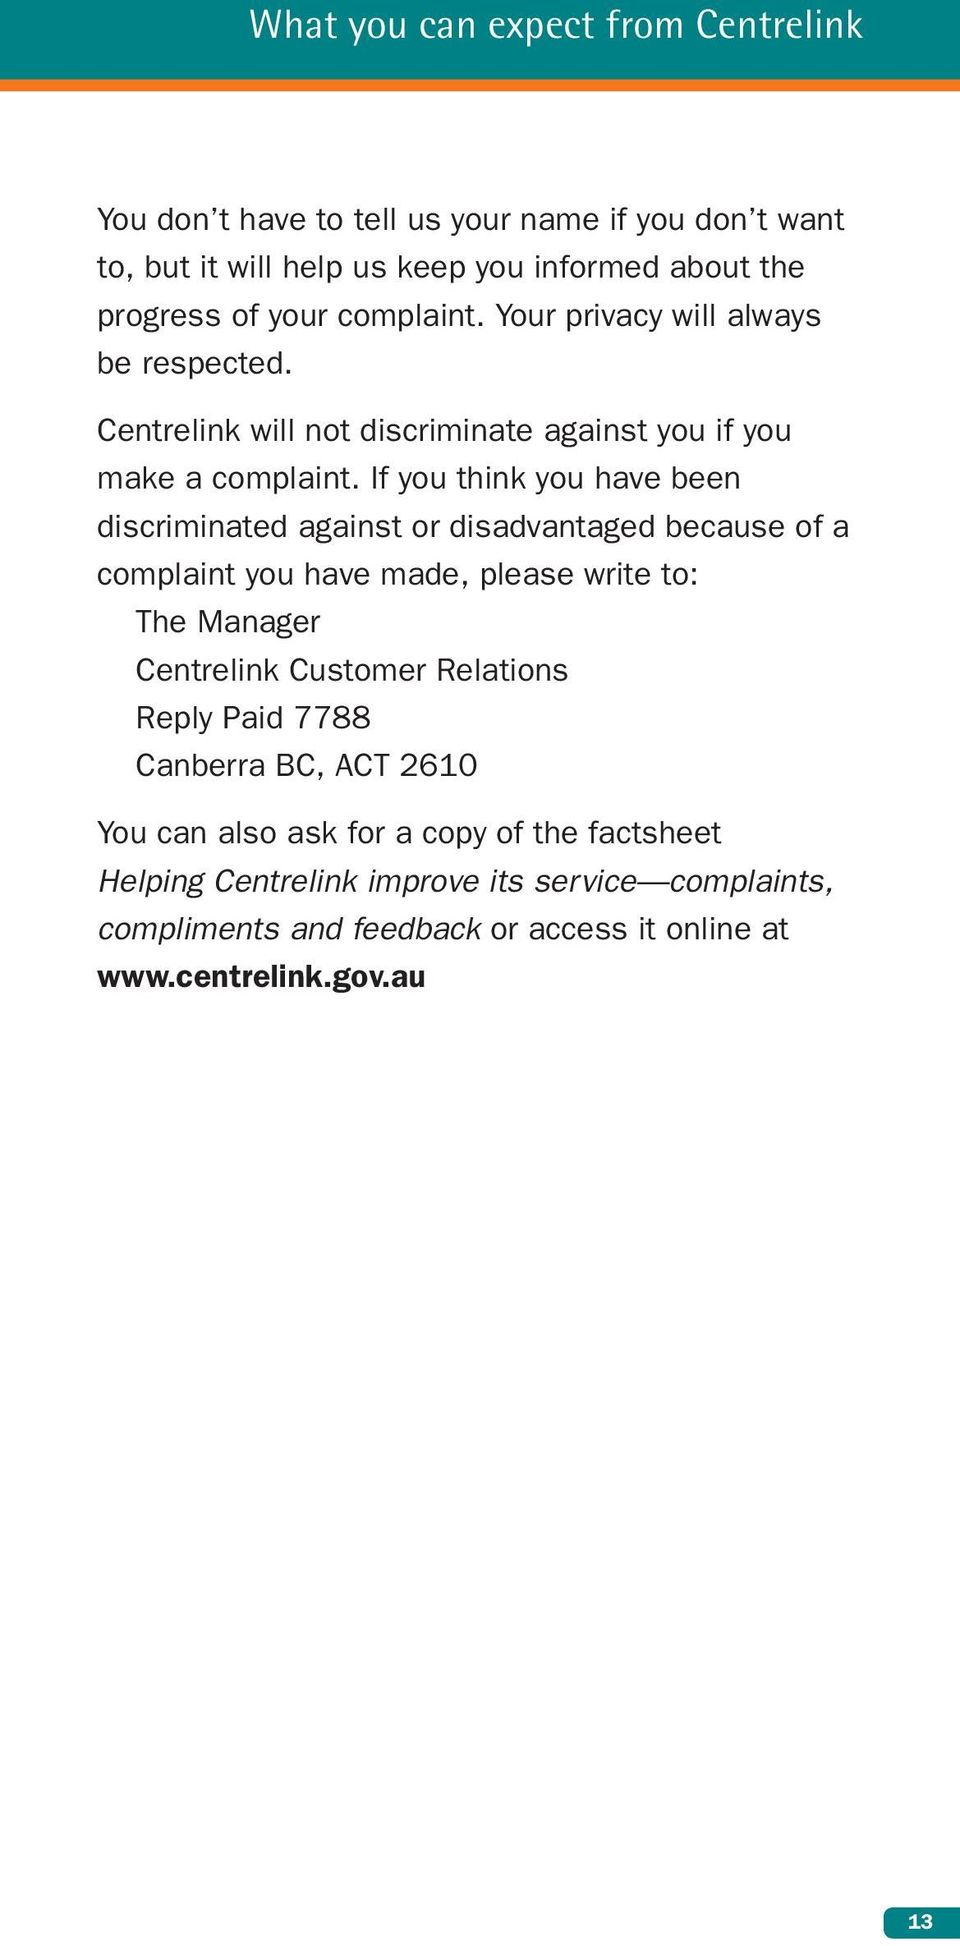 If you think you have been discriminated against or disadvantaged because of a complaint you have made, please write to: The Manager Centrelink Customer